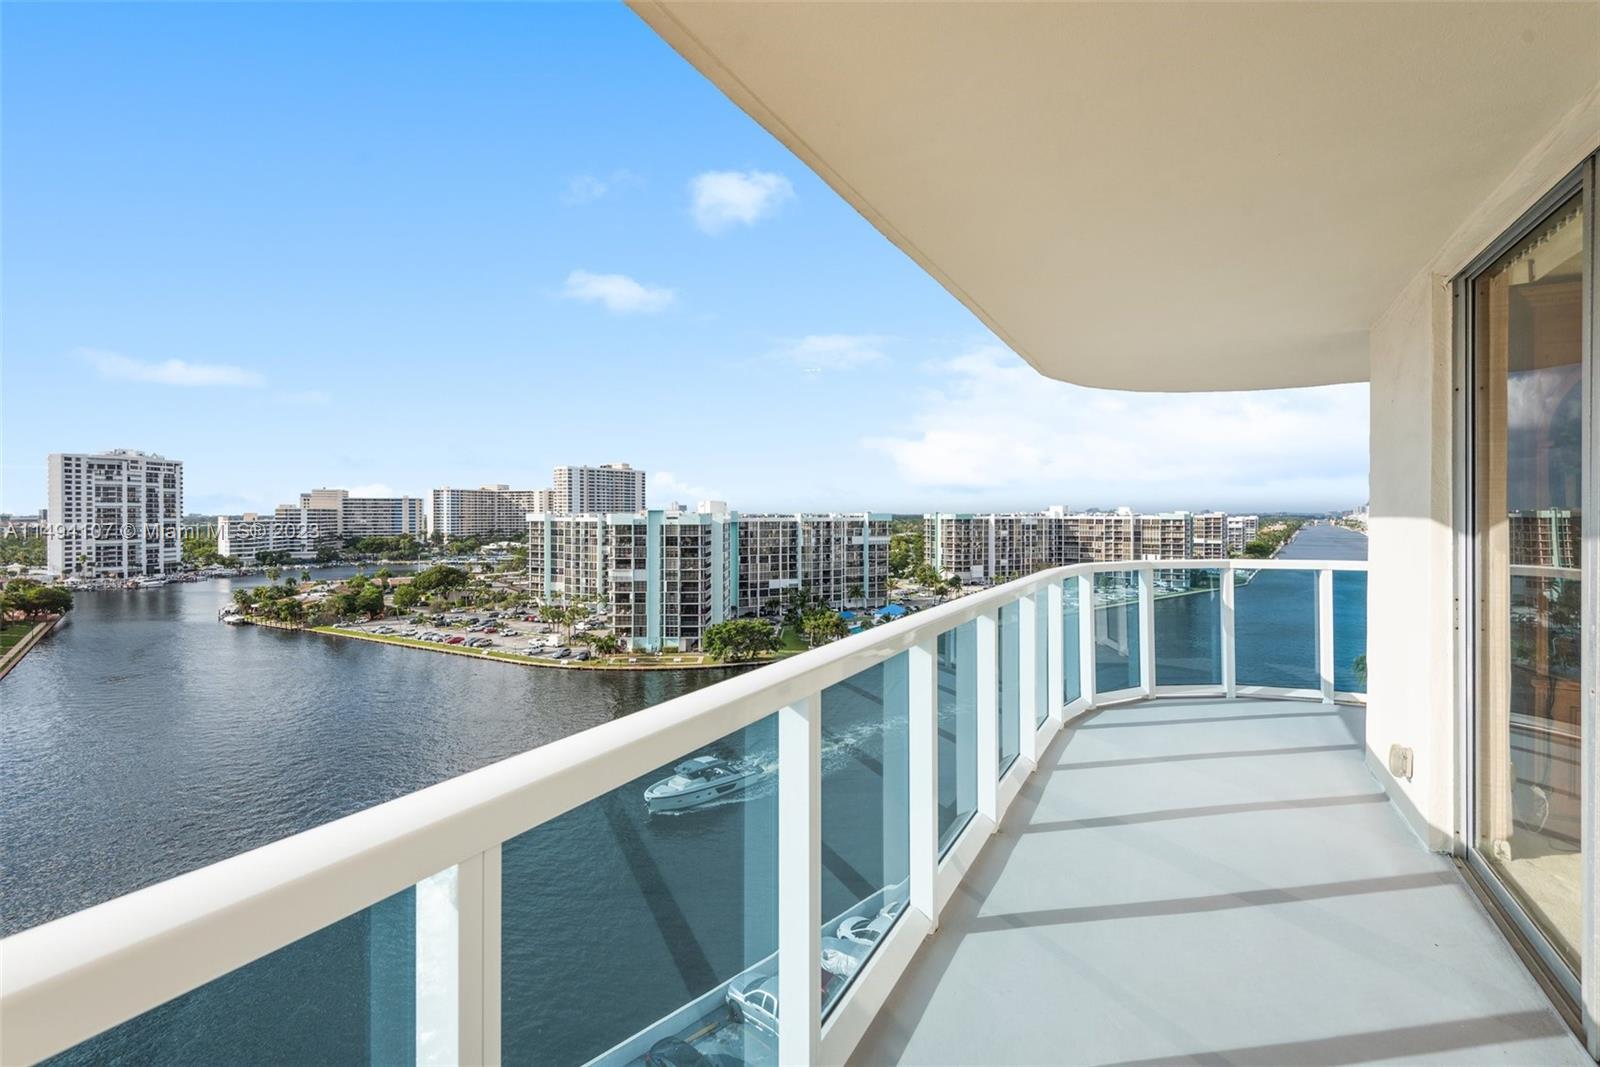 Photo of 3800 S Ocean Dr #1105 in Hollywood, FL